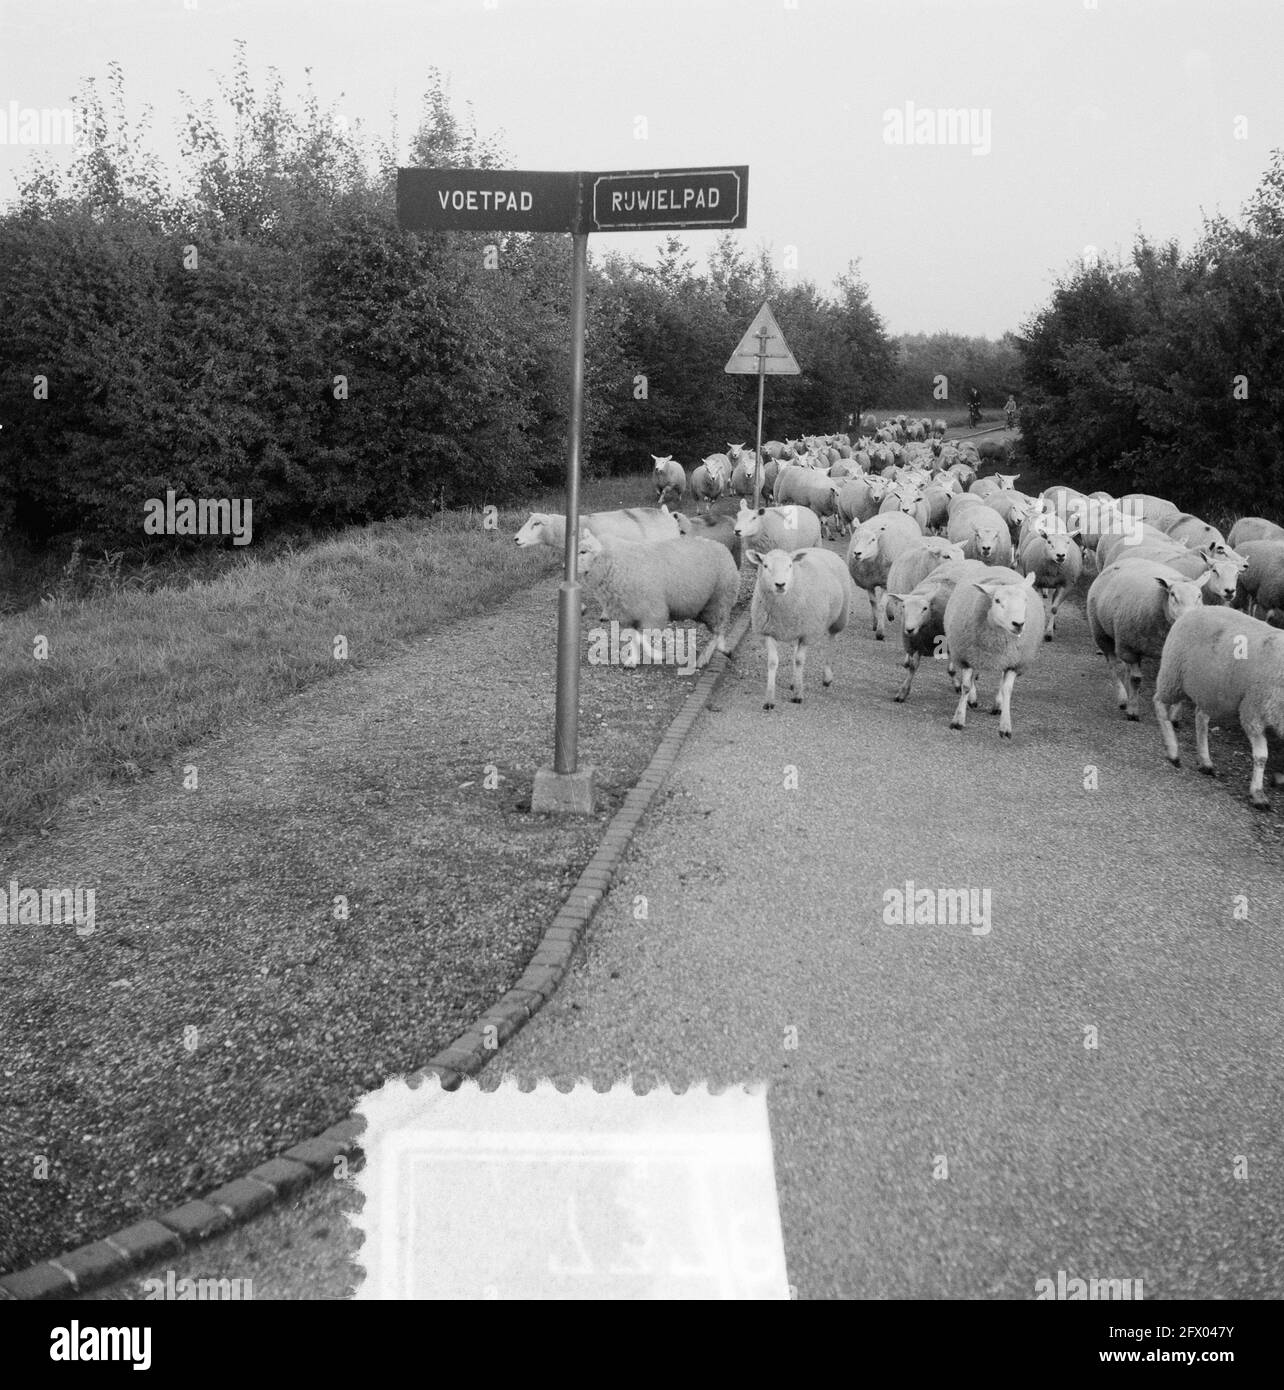 Sheep herd in Amsterdamse Bos, shepherd K. L. Meyer, October 10, 1955,  BOSSEN, Sheep herds, The Netherlands, 20th century press agency photo, news  to remember, documentary, historic photography 1945-1990, visual stories,  human